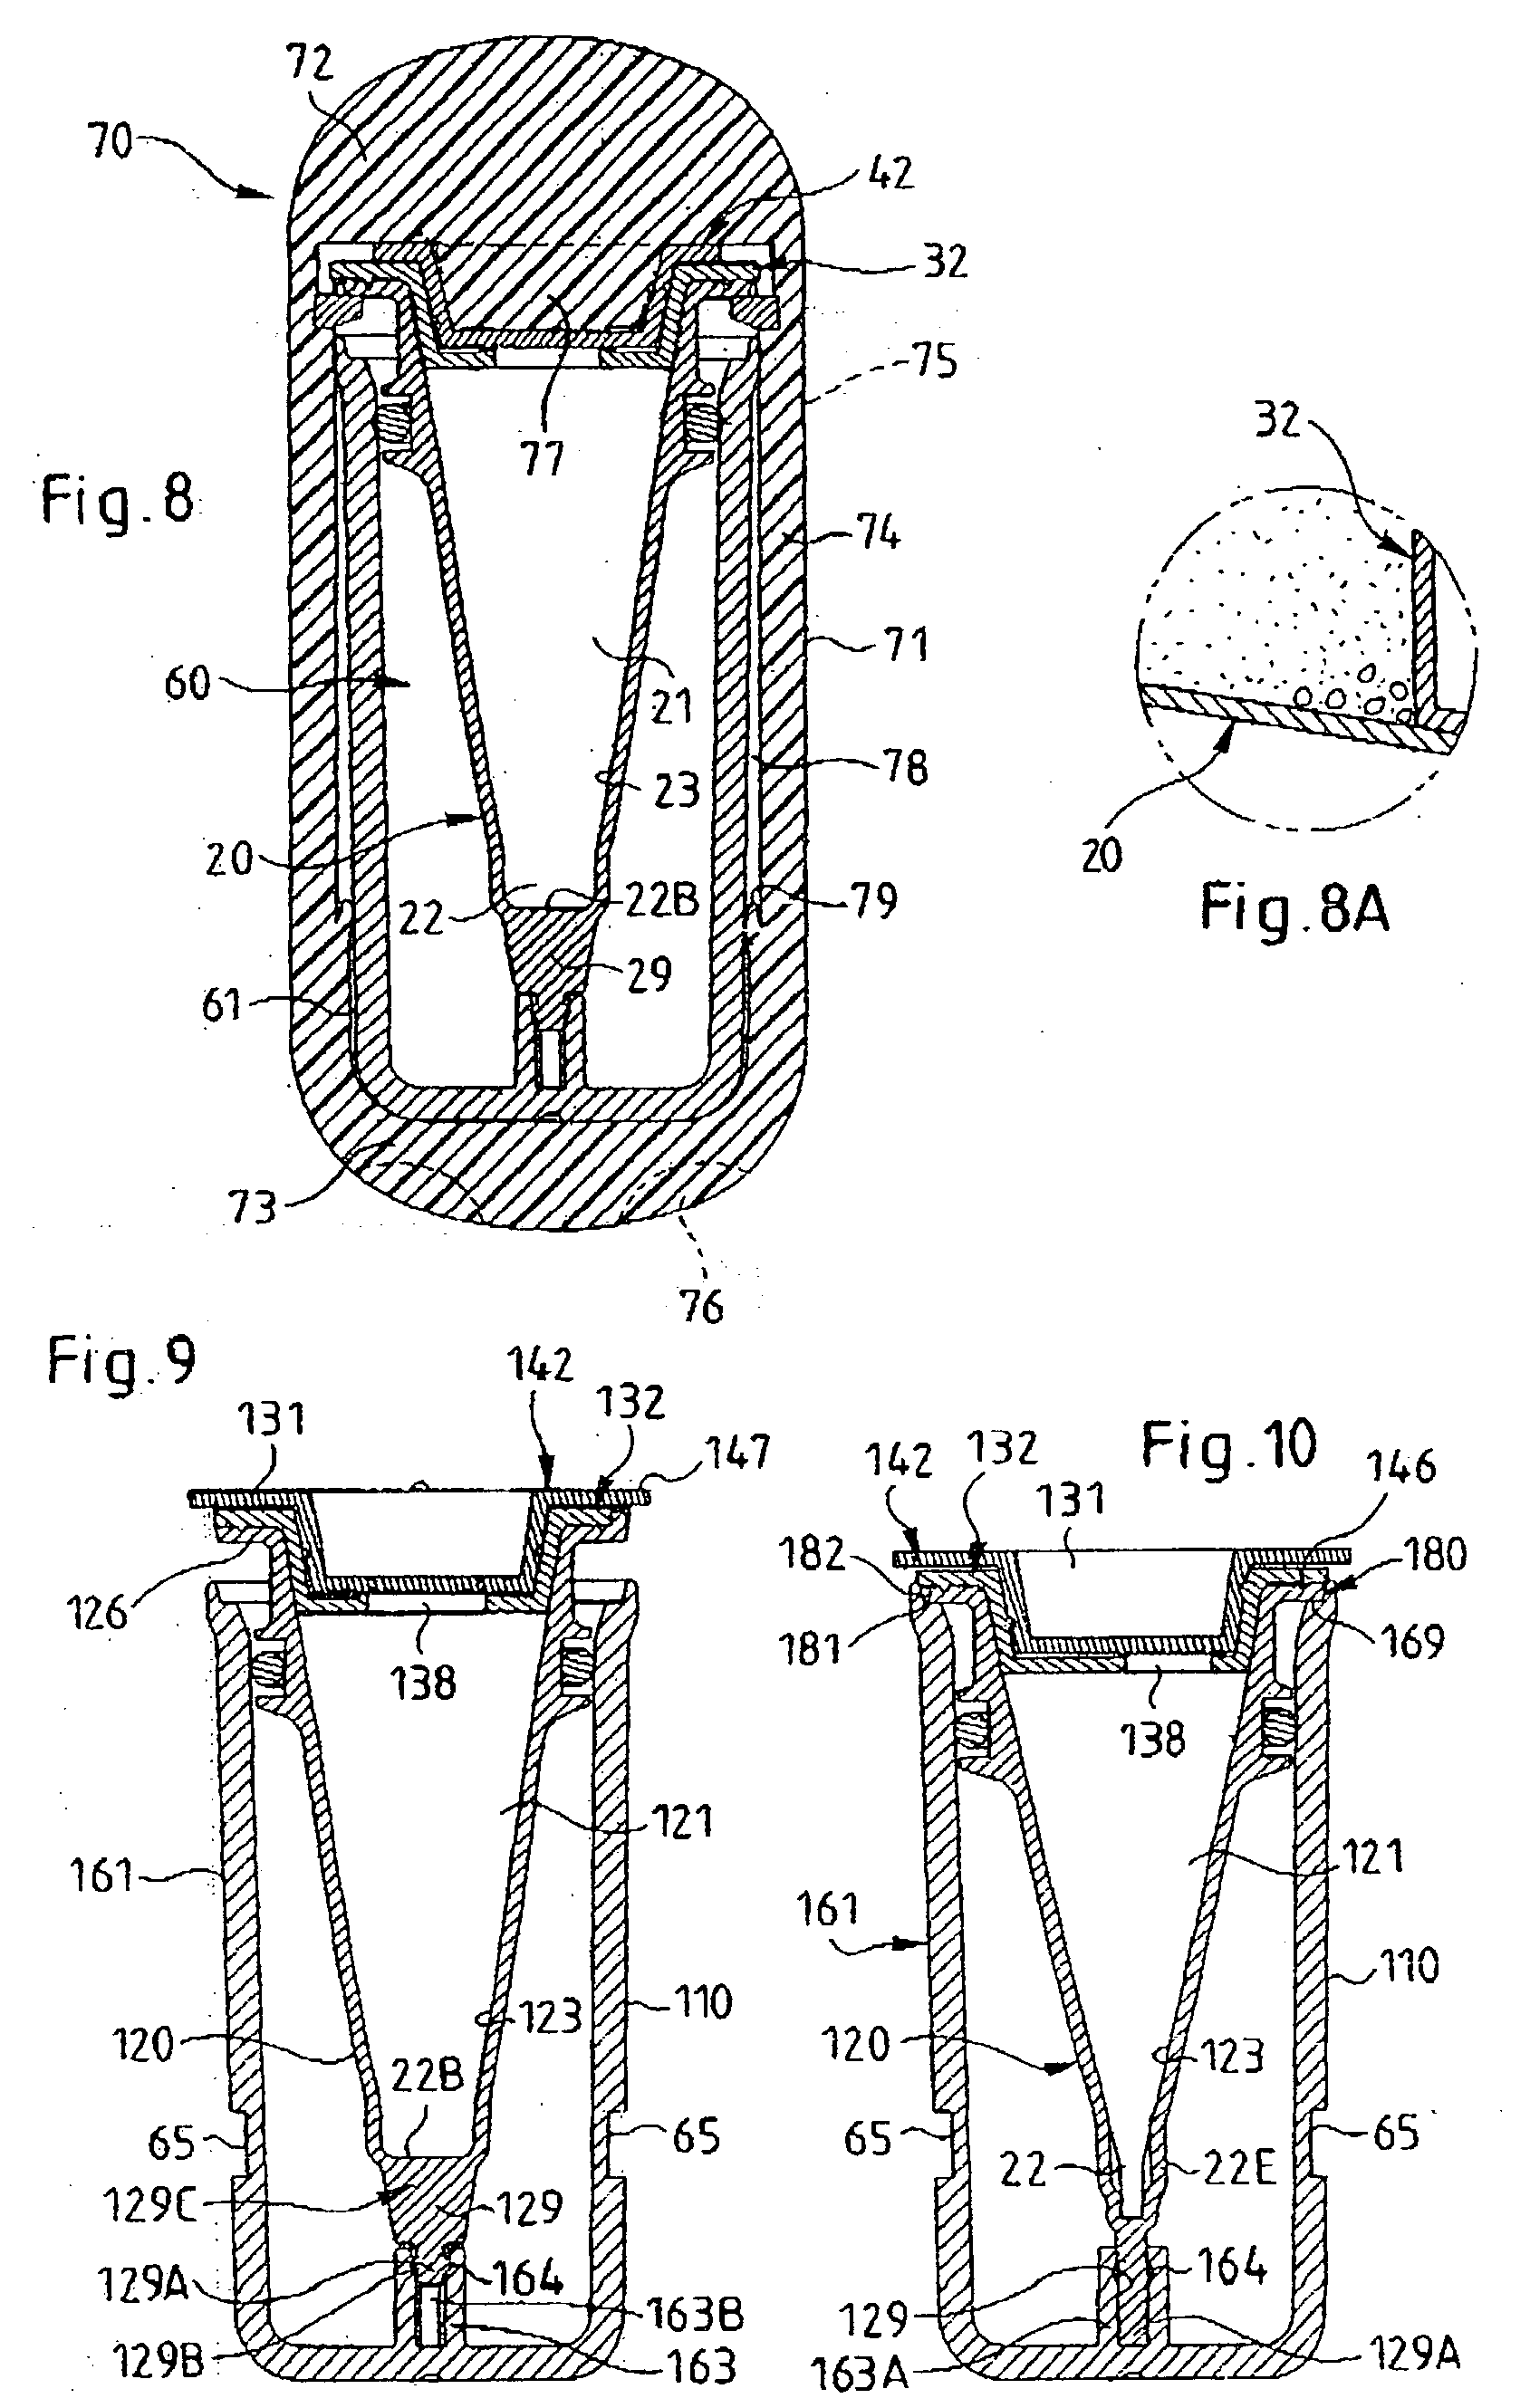 Incubation and/or storage container system and method